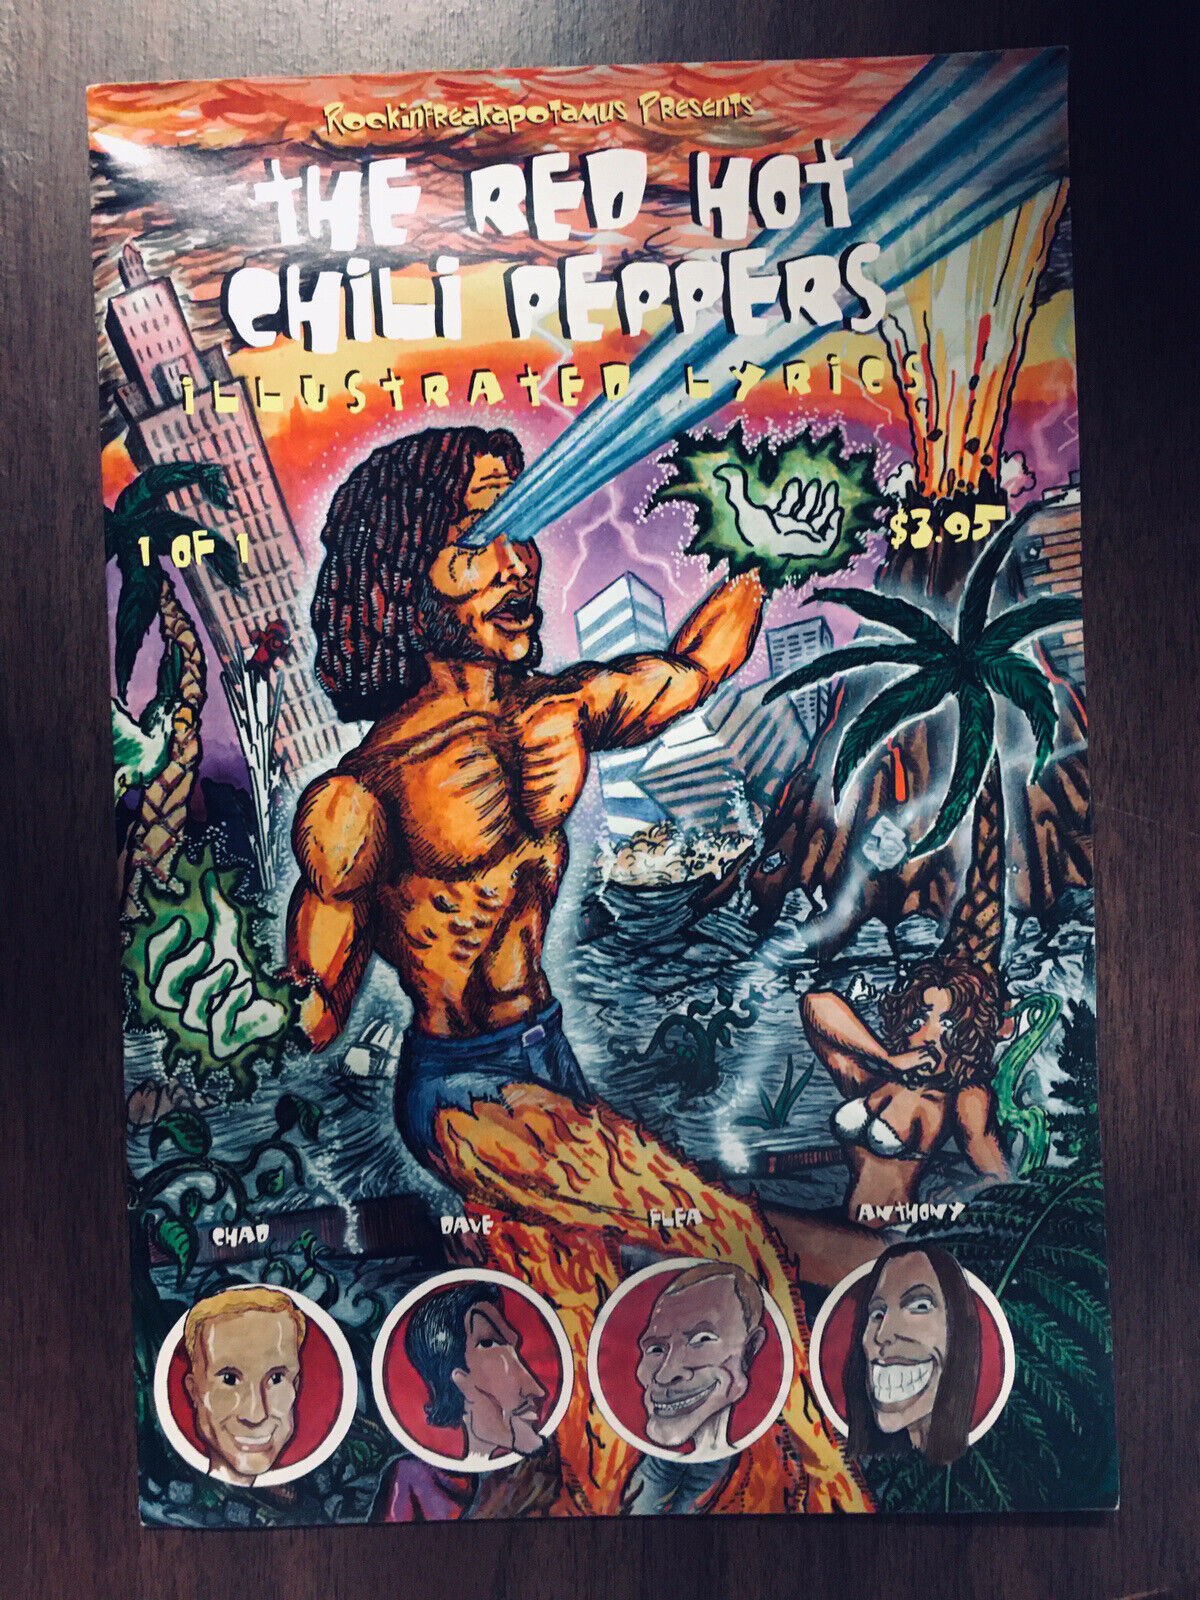 RED HOT CHILI PEPPERS Illustrated Lyrics #1 Rare 1st Print Rock Comic Book 1997